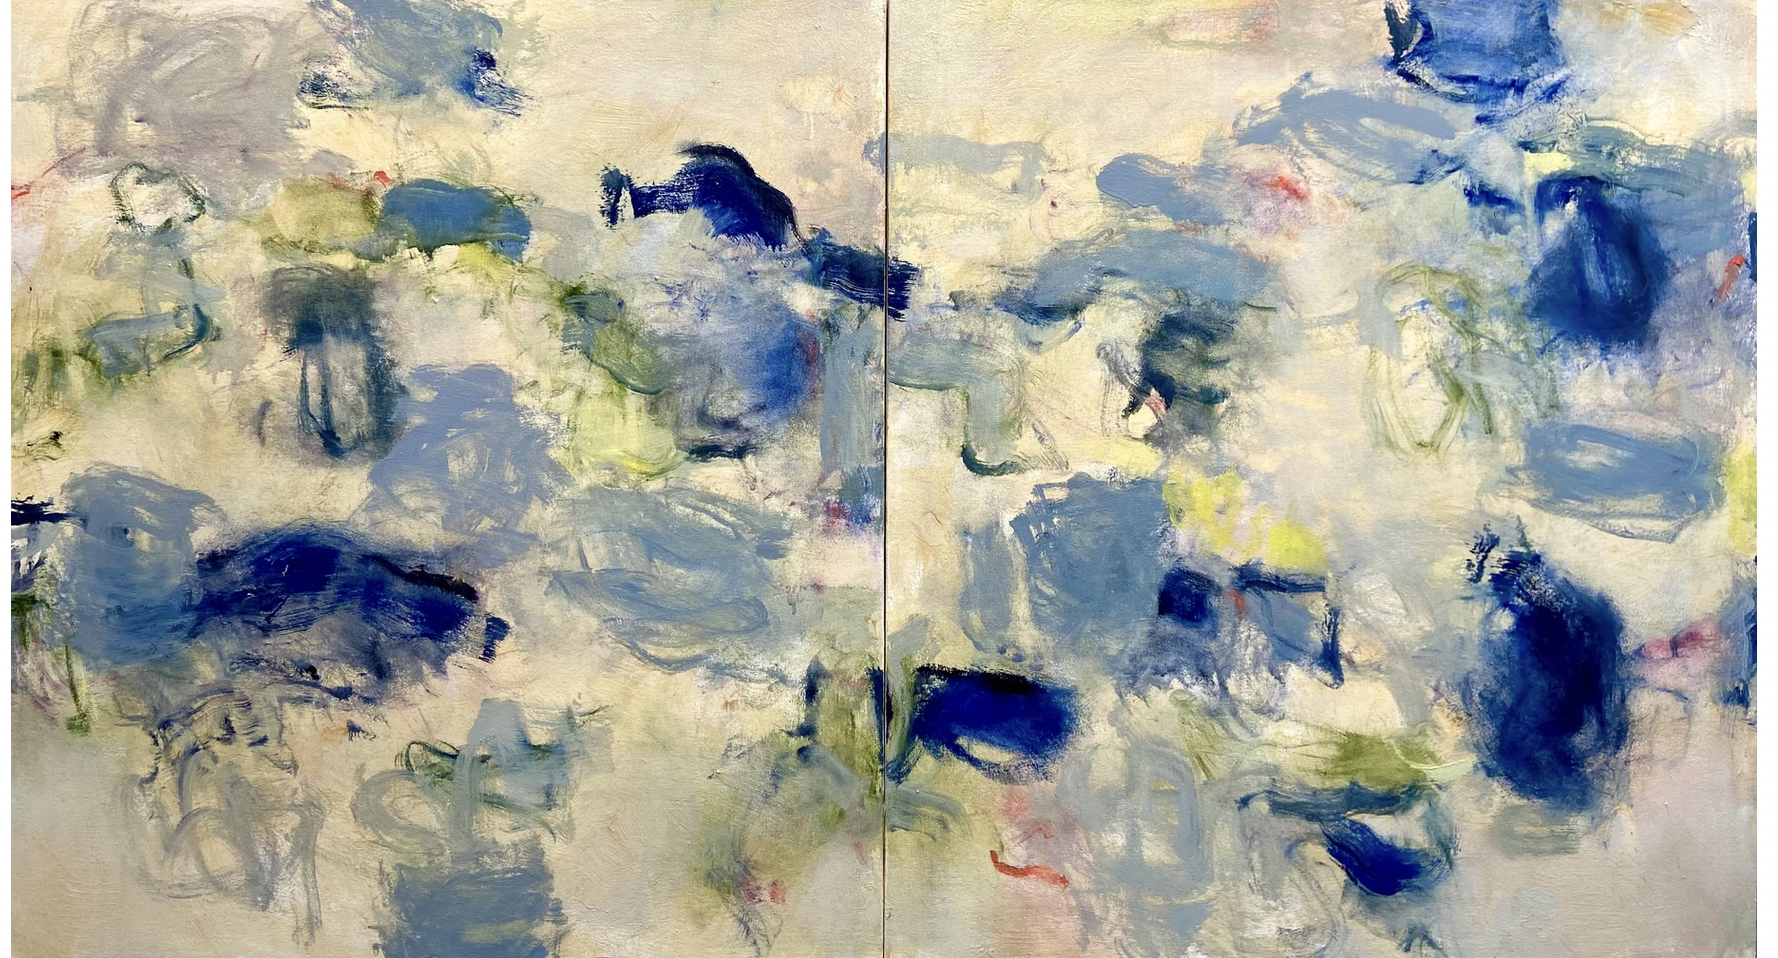 Anne Raymond, Changing 1 and 2, Oil on canvas, 40 x 72 inches $10,000 40 x 36 inches each $5400 each